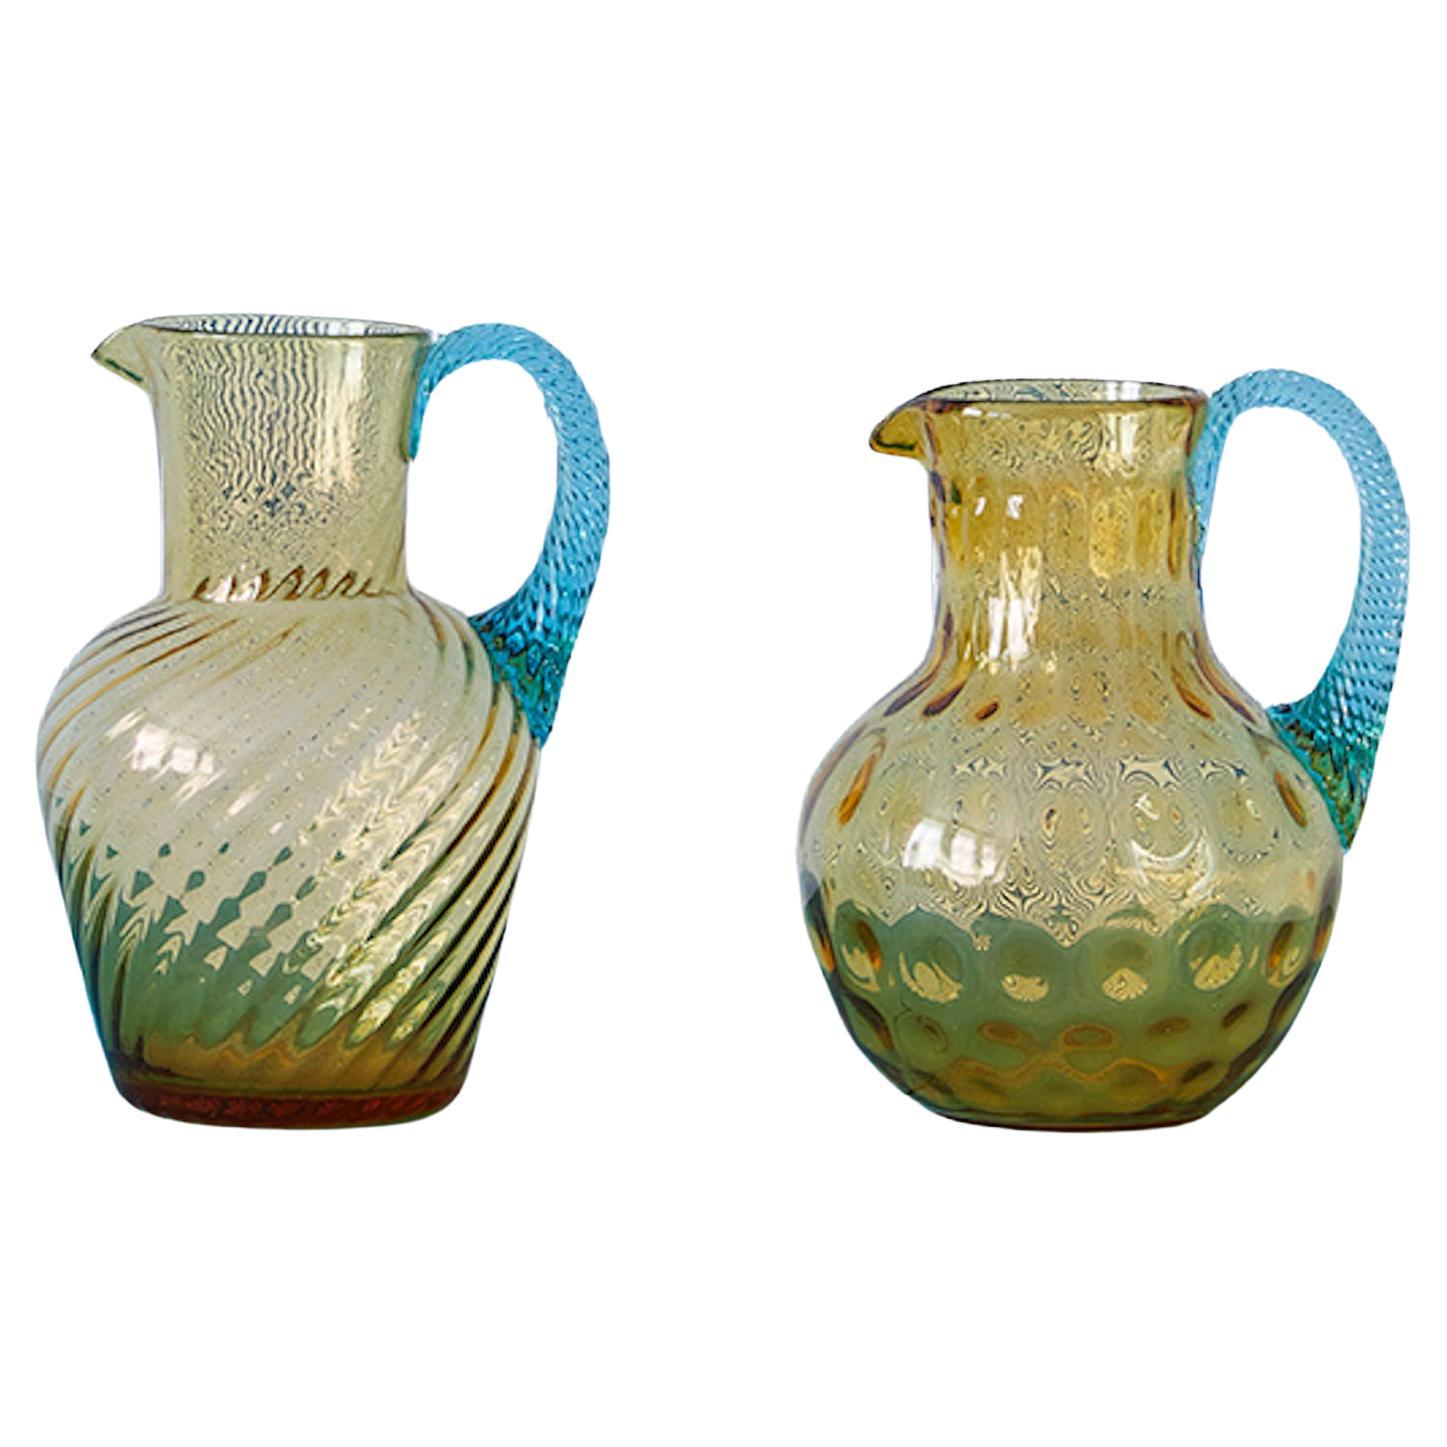 Vintage Pair of Pitchers in Amber and Turquoise Glass, France, 20th Century 